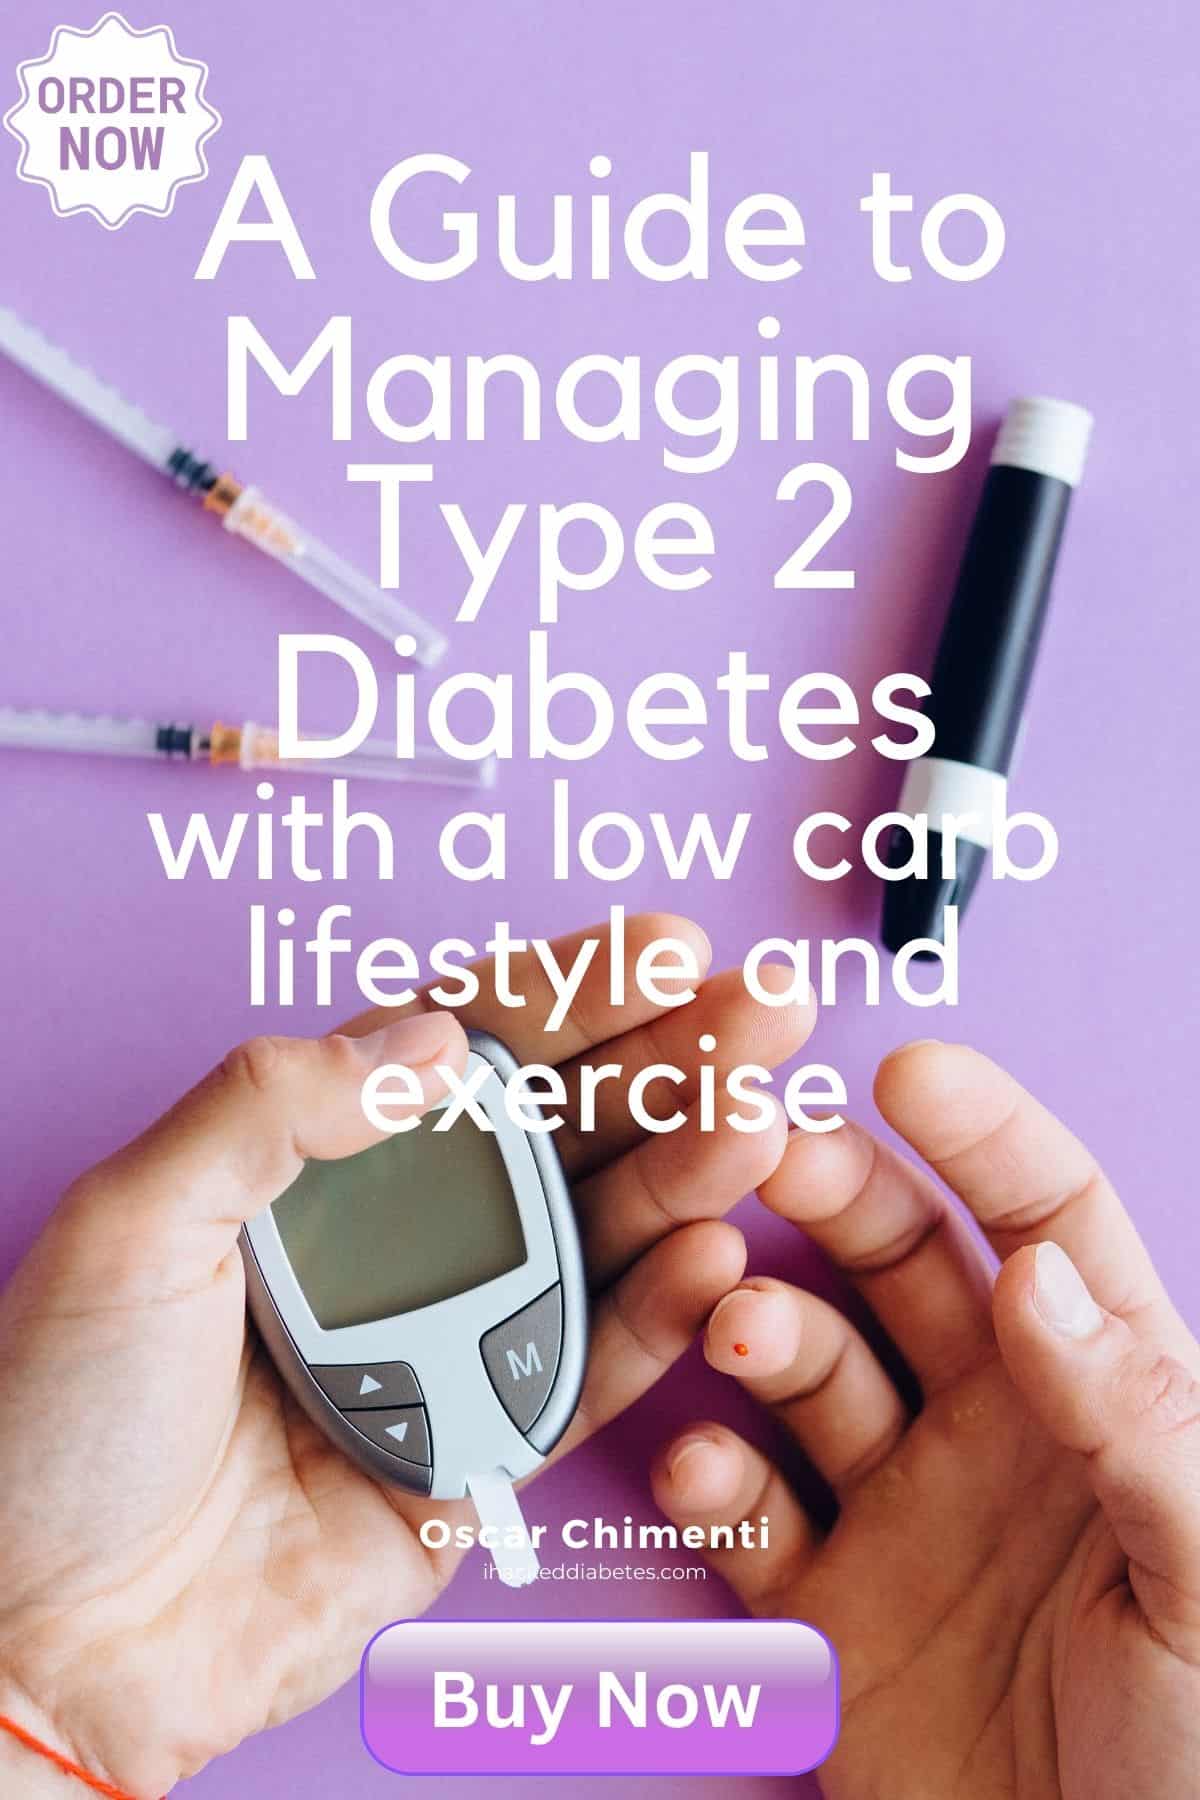 Cover photo of the guide to managing type 2 diabetes with a low carb lifestyle and exercise.